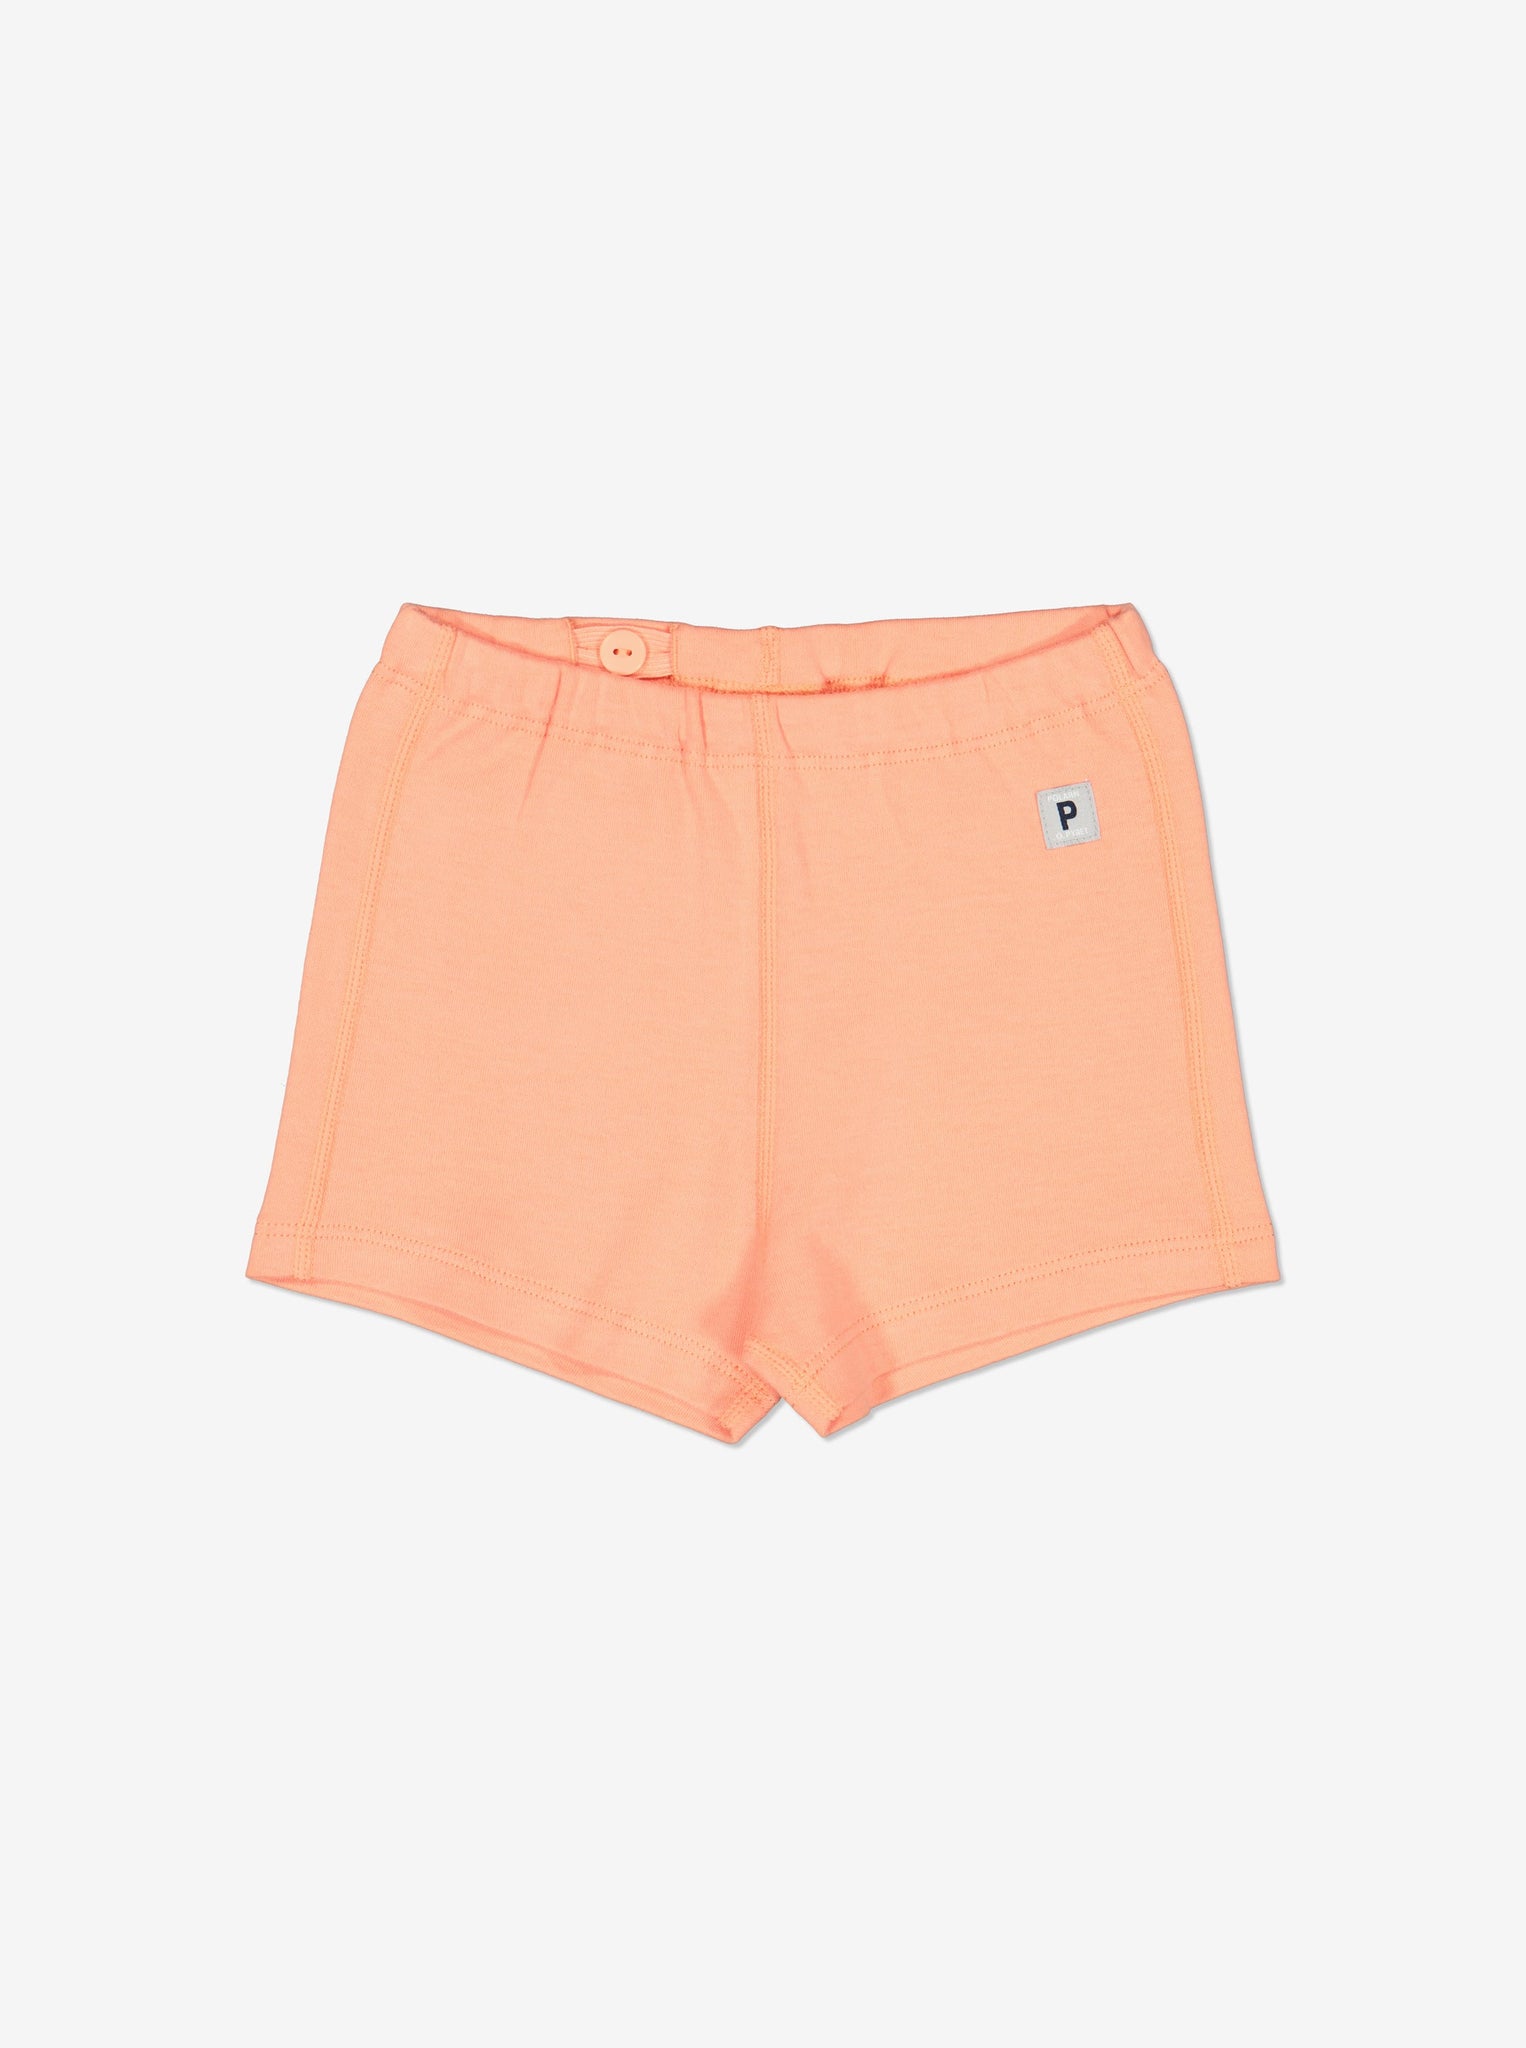 Organic Cotton Peach  Baby Shorts from Polarn O. Pyret Kidswear. Ethically made and sustainably sourced materials.